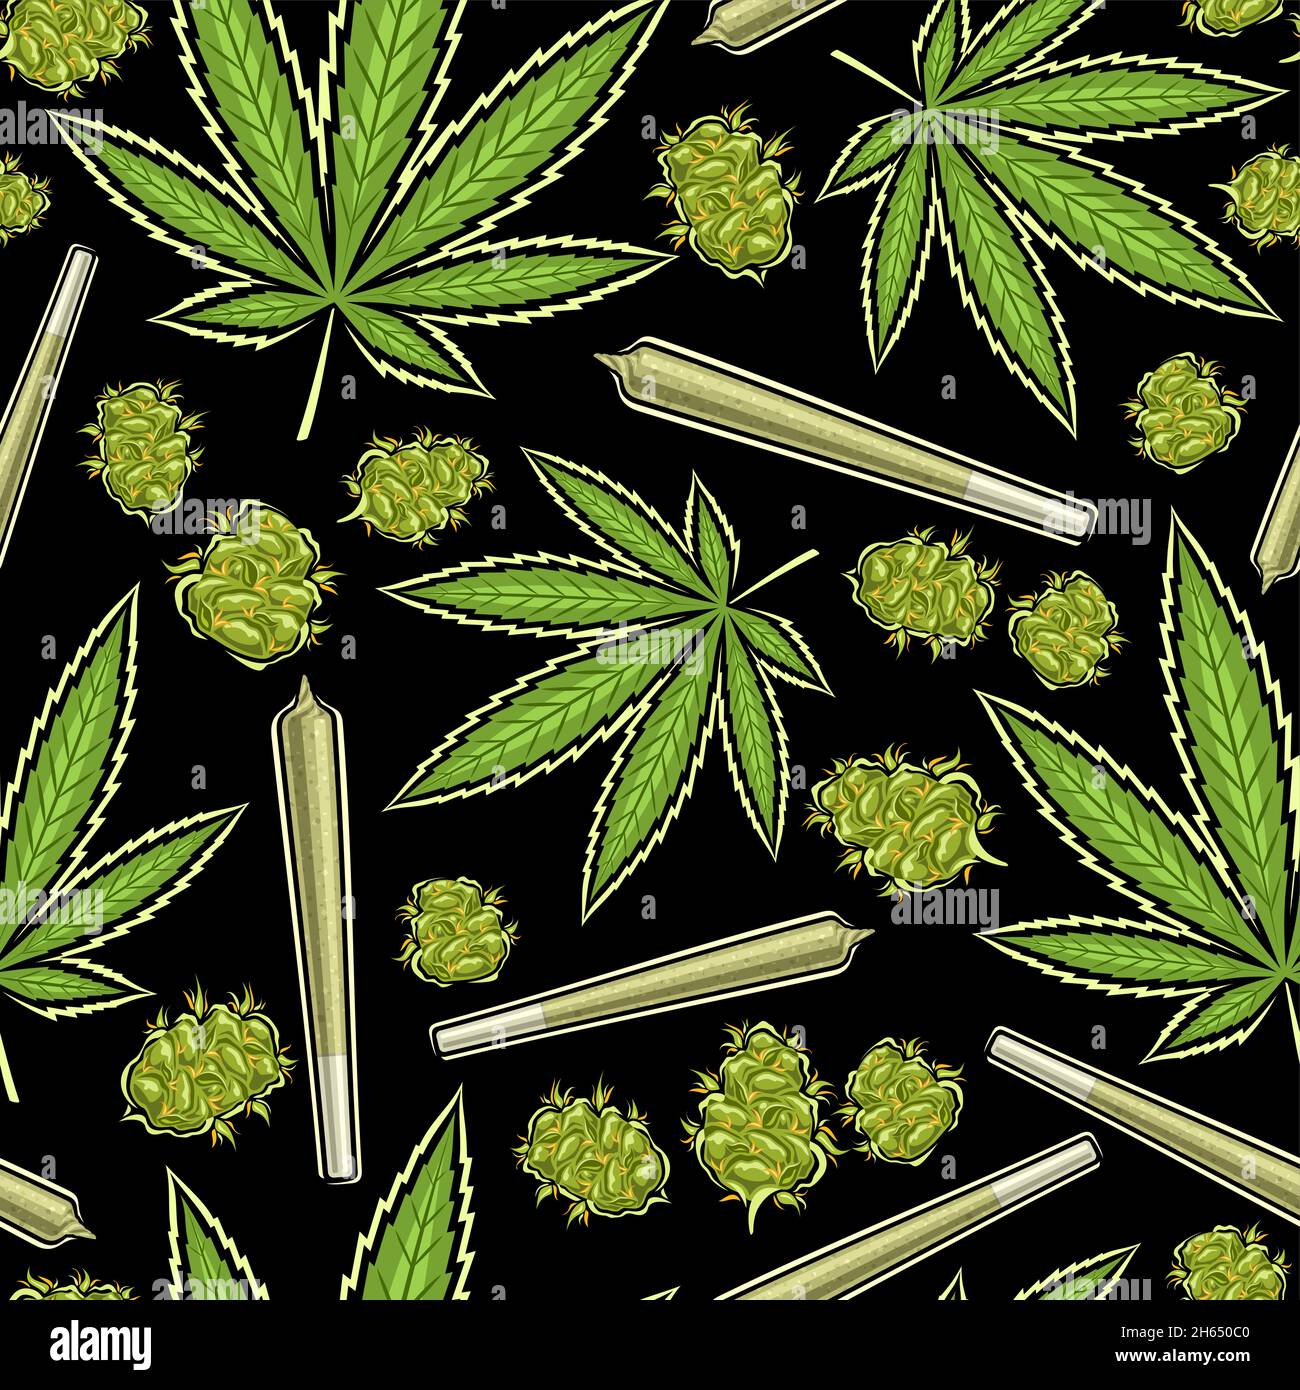 Vector Marijuana Seamless Pattern, square repeating background of marijuana leaves, medicinal cannabis buds, decorative poster with cut out illustrati Stock Vector